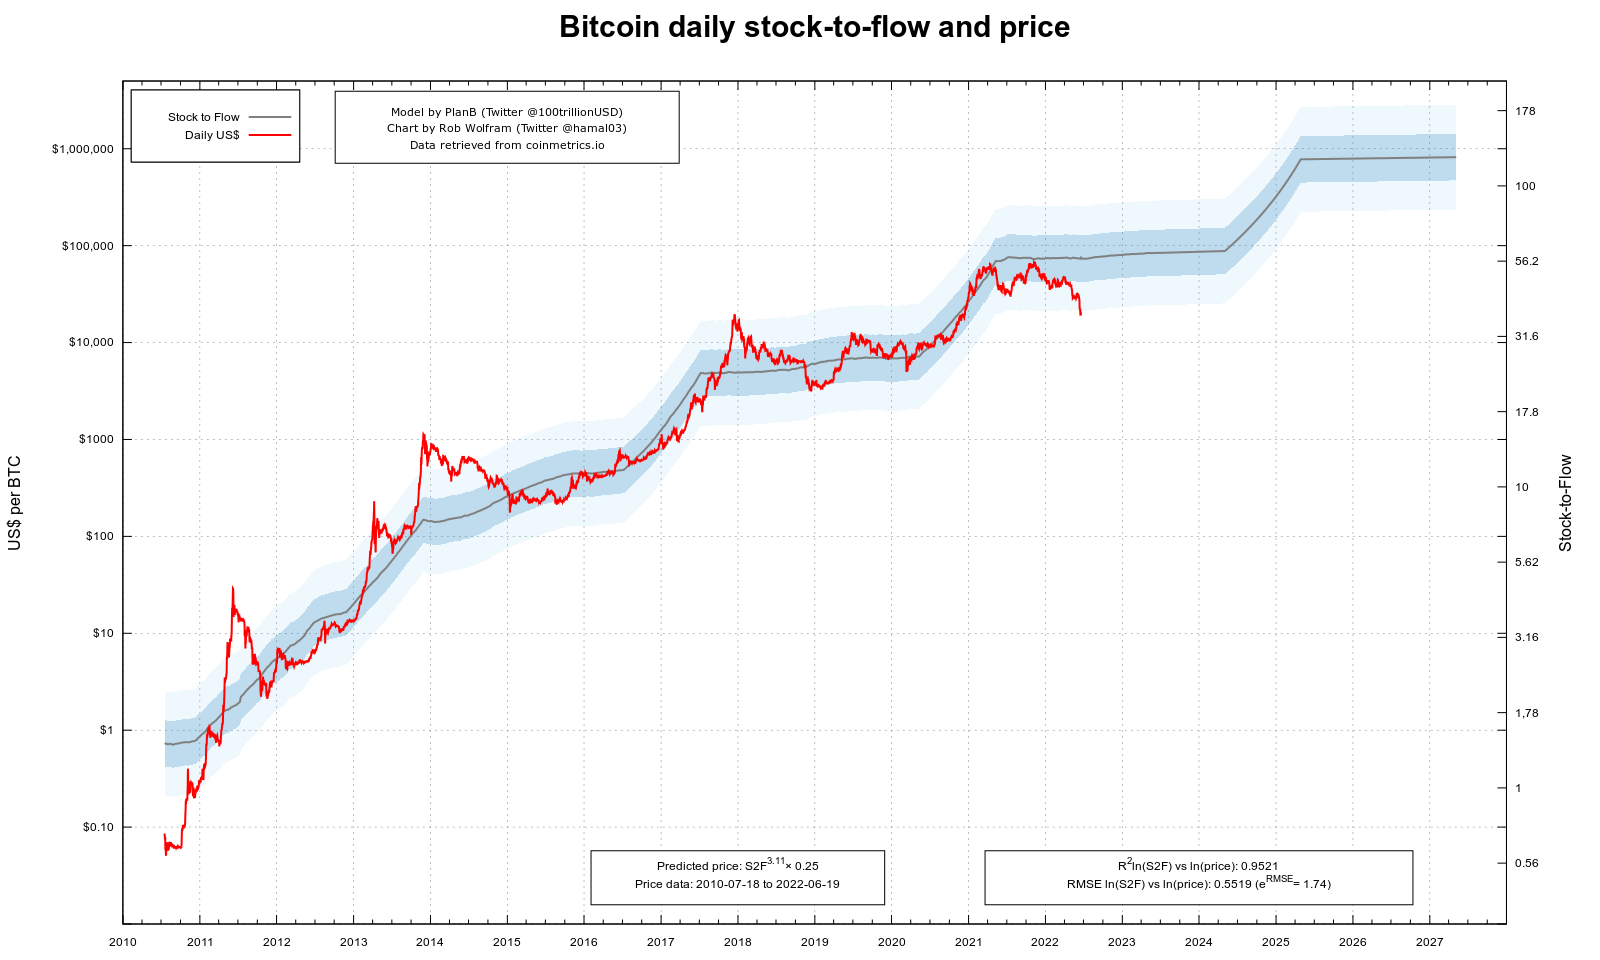 Recent volatility sees Bitcoin Stock-to-Flow model breached for the first time